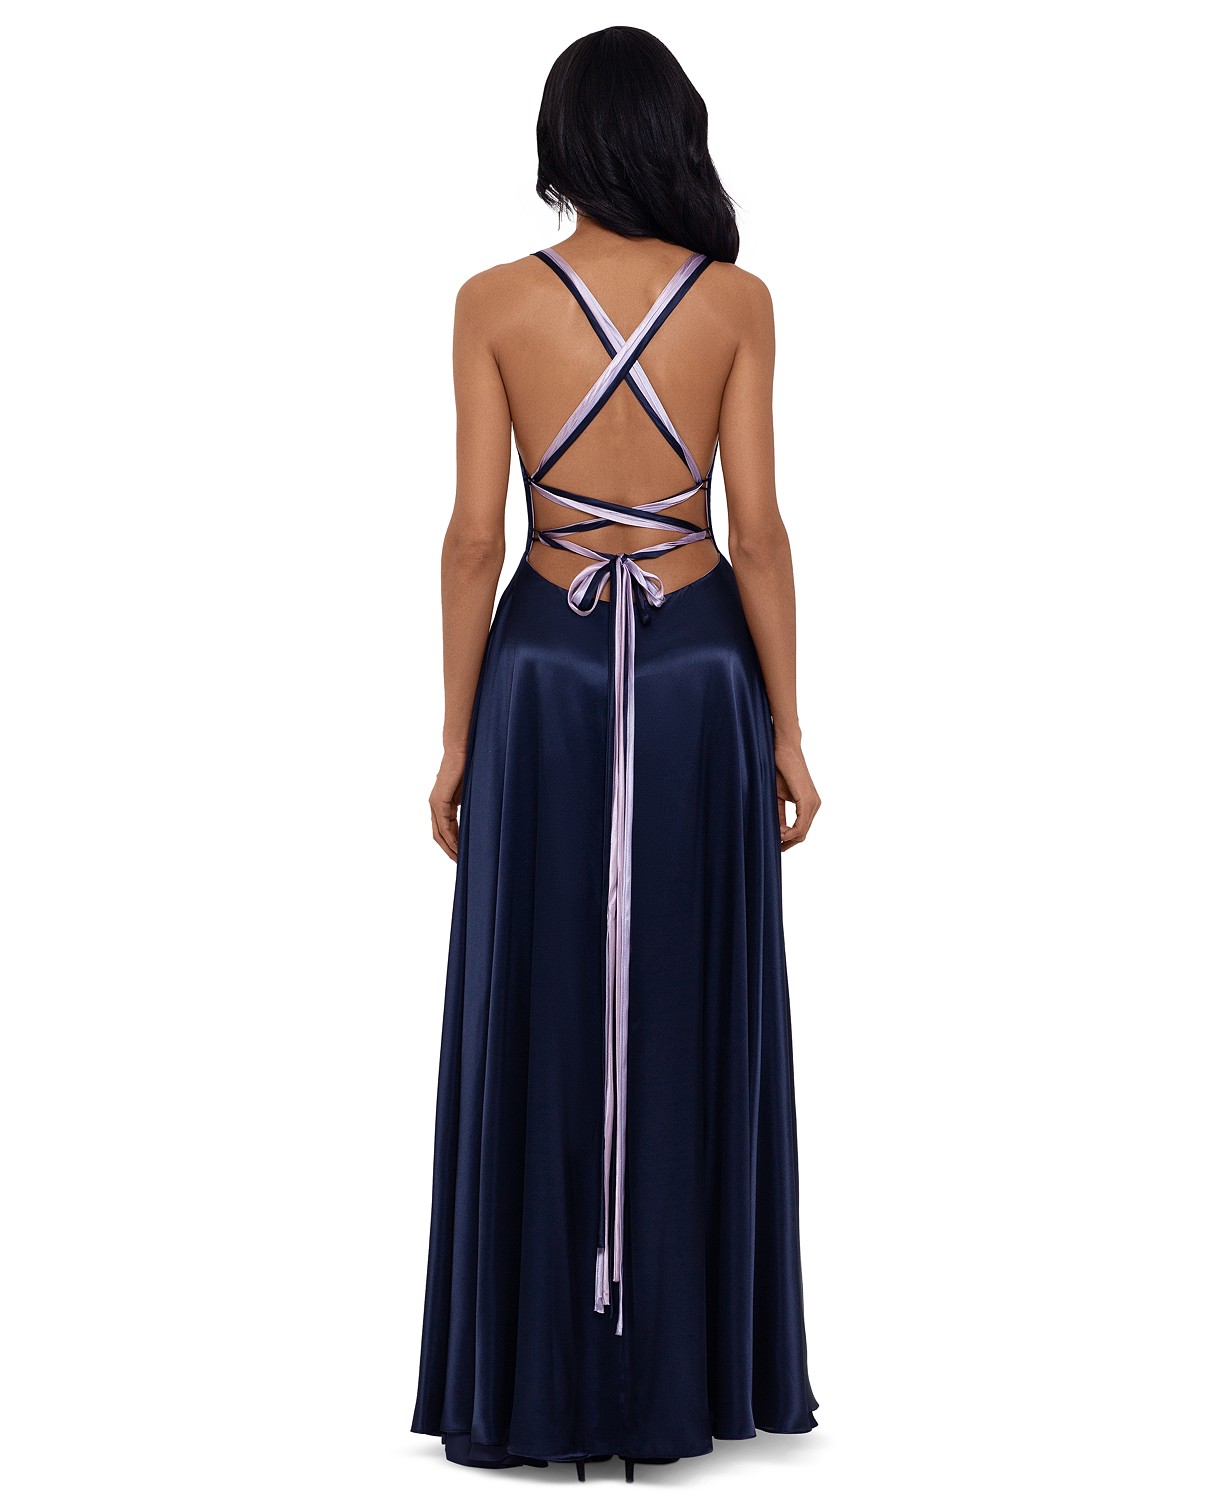 woocommerce-673321-2209615.cloudwaysapps.com-betsy-amp-adam-womens-tricolor-tie-back-satin-gown-dress